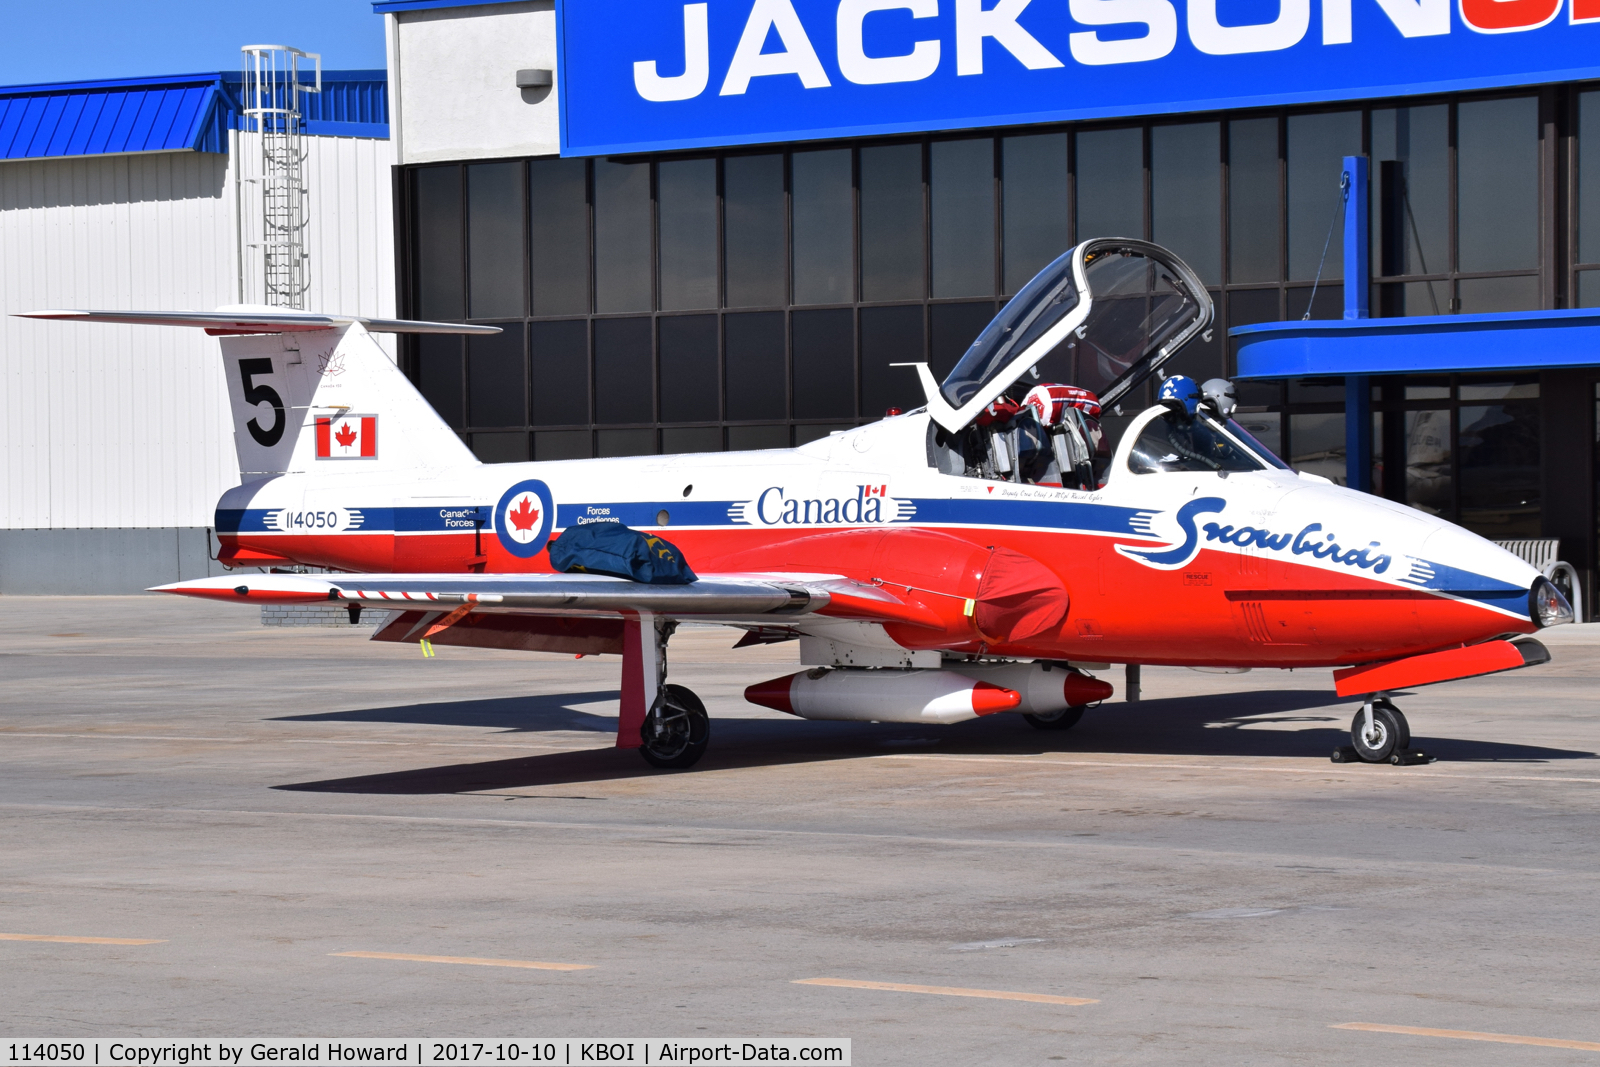 114050, Canadair CT-114 Tutor C/N 1050, Parked on the north GA ramp. First Snowbird arrival for the upcoming airshow.